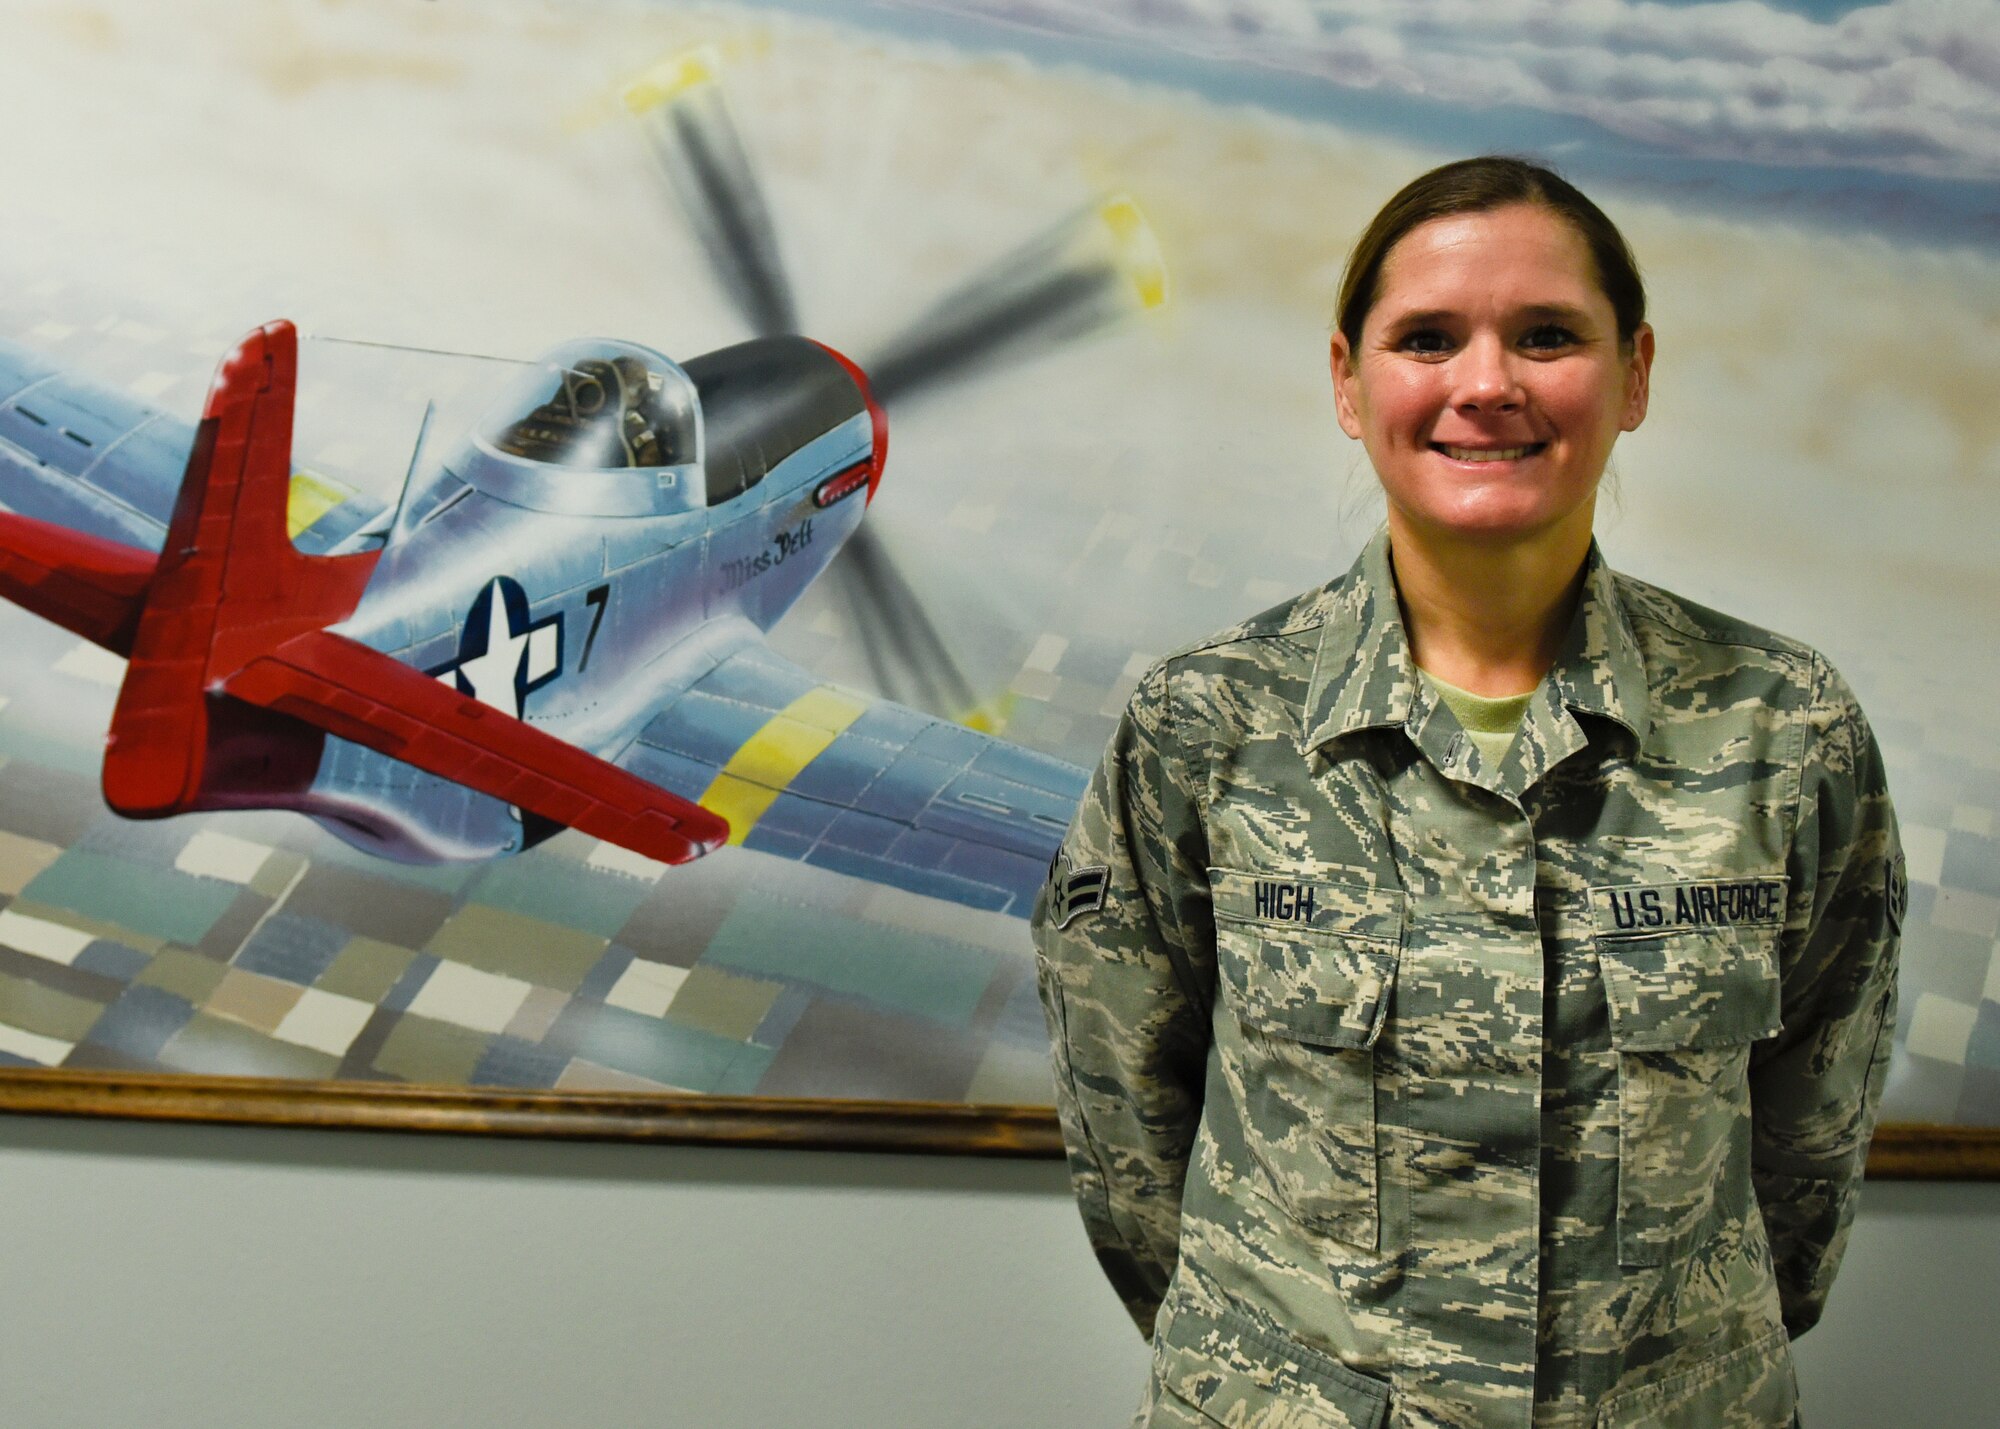 Airman 1st Class Dana High, 363rd Training Squadron maintenance management production apprentice course graduate, poses for a photo at Sheppard Air Force Base, Texas, Oct. 23, 2019. High was awarded the ACE award after receiving 100 percent scores on all six block tests in 33 days of instruction at Sheppard. (U.S. Air Force photo by Airman 1st Class Pedro Tenorio)